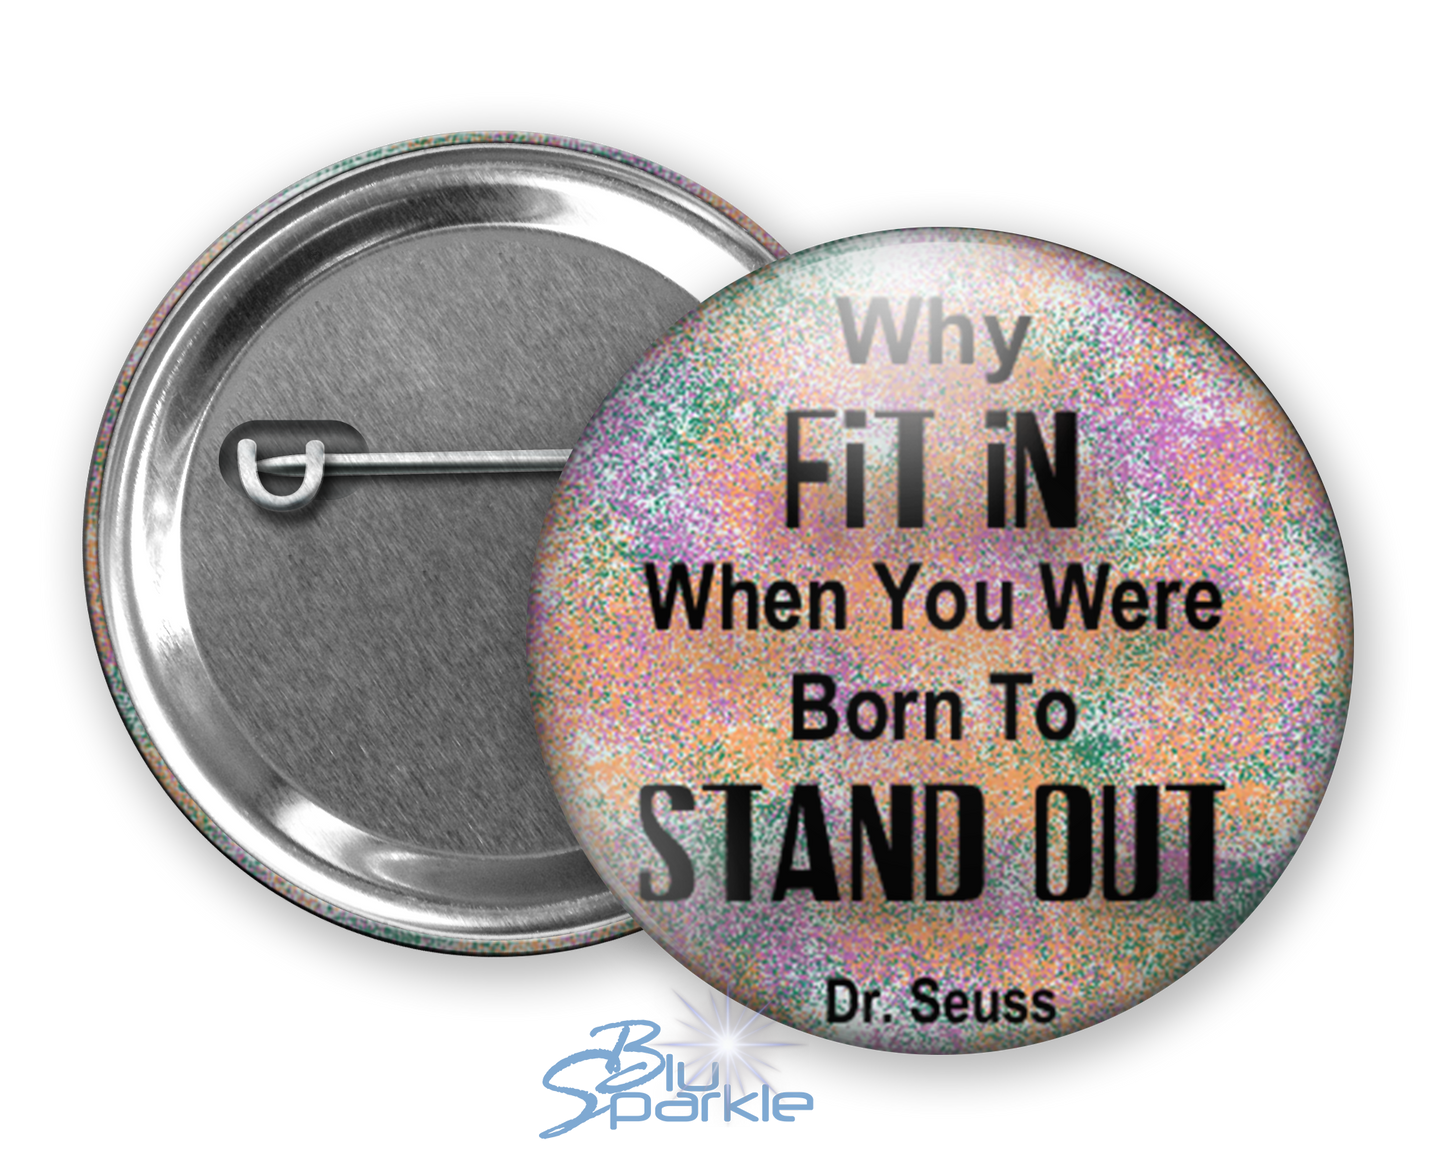 Why FIT IN When You Were Born To STAND OUT! - Pinback Buttons